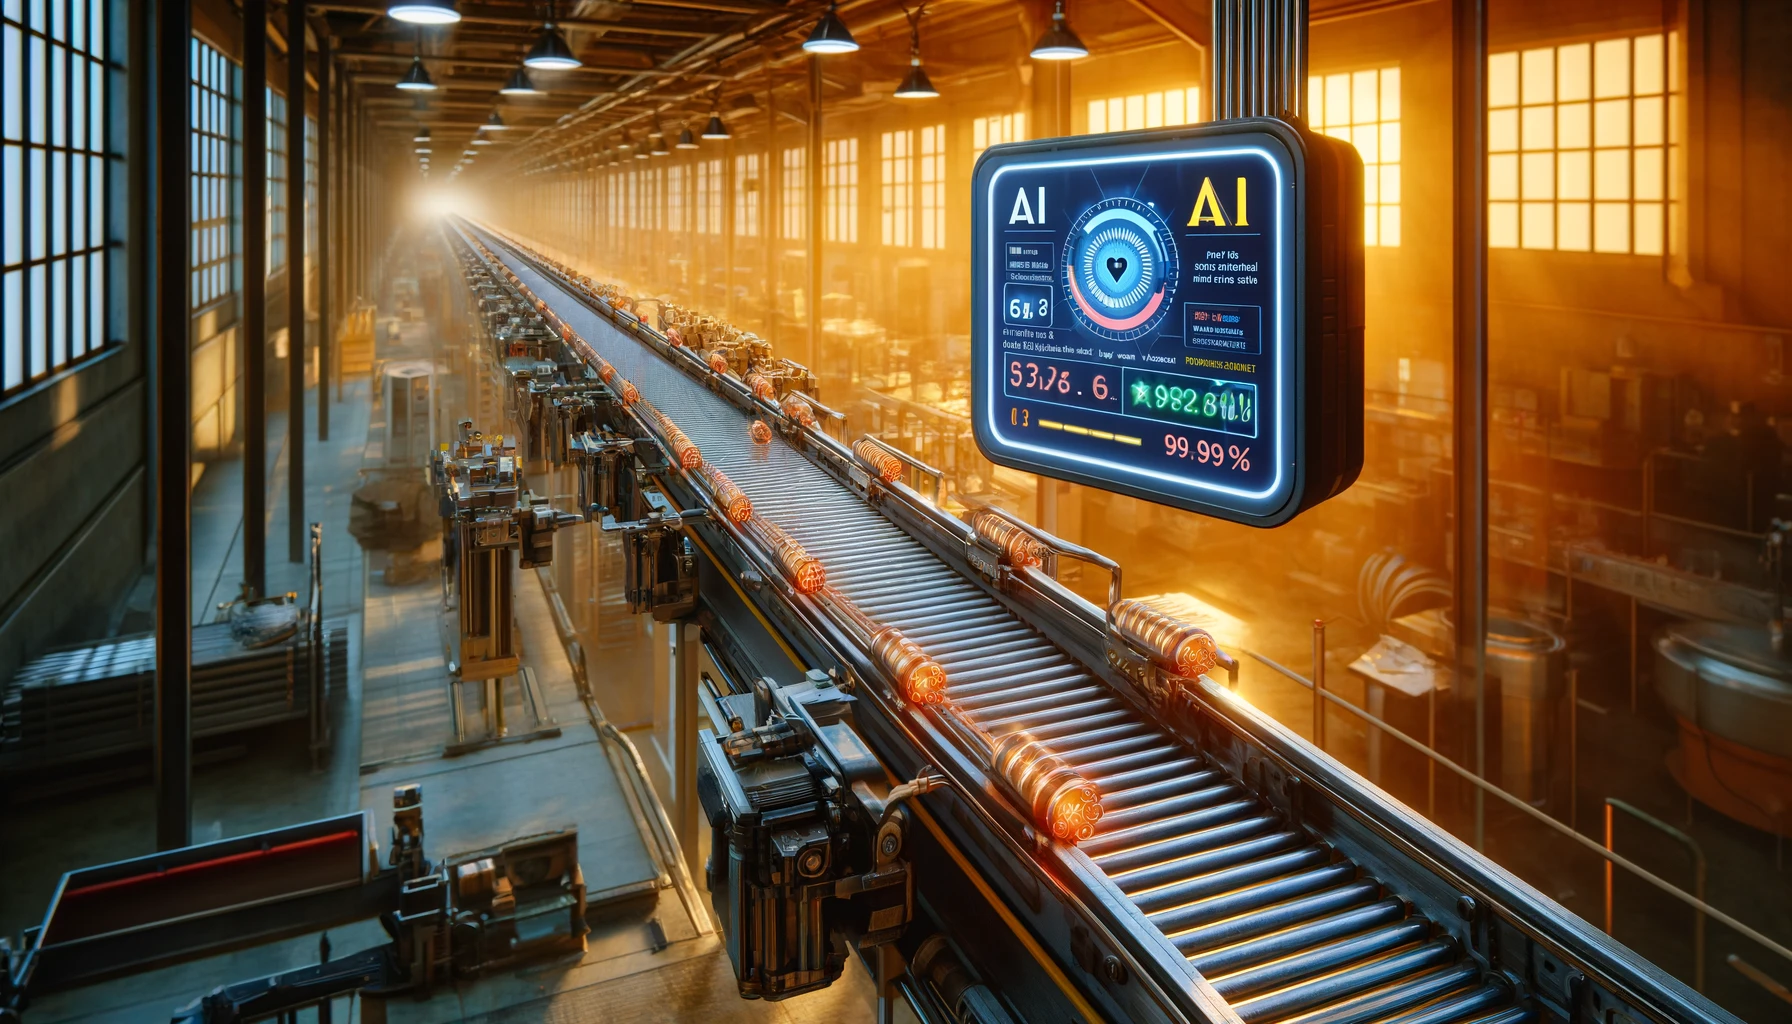 The illustration for the article on the AI-powered optical solution for real-time bar counting on conveyor belts is ready, highlighting the technology's precision and efficiency within an industrial setting.